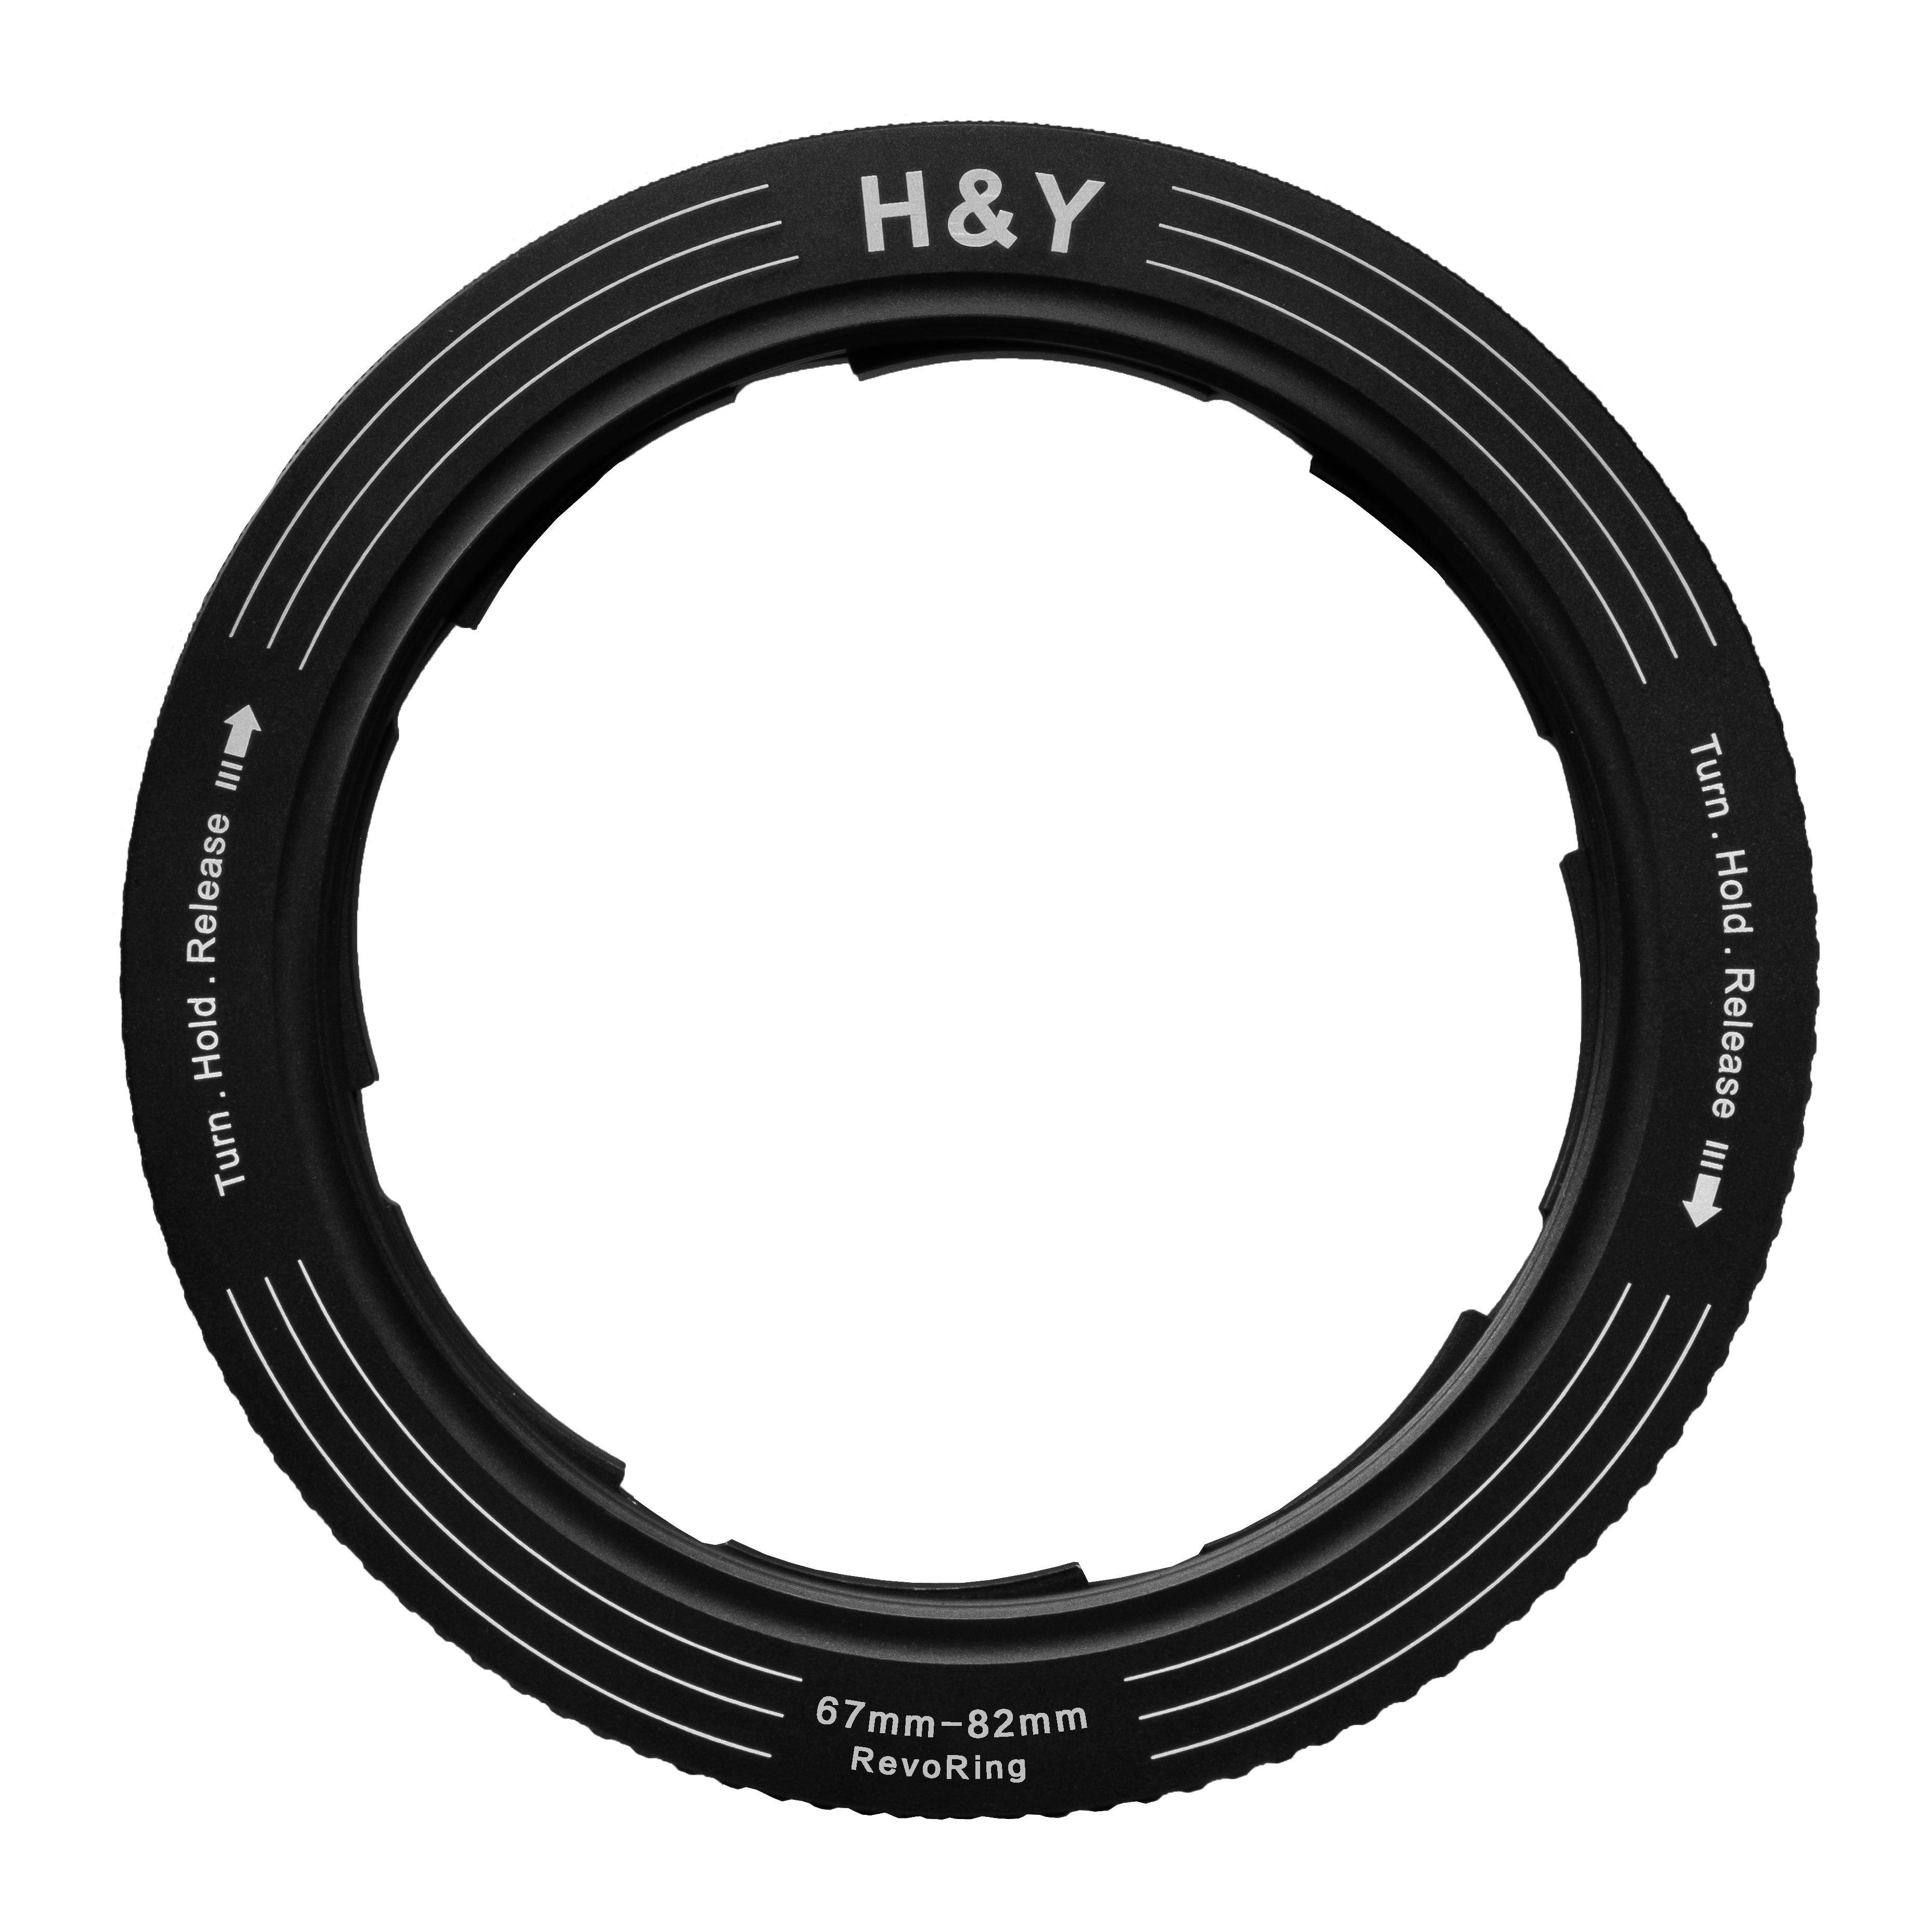 H&Y 67-82mm RevoRing Variable Adapter for 82mm Filters – Kudos Cameras